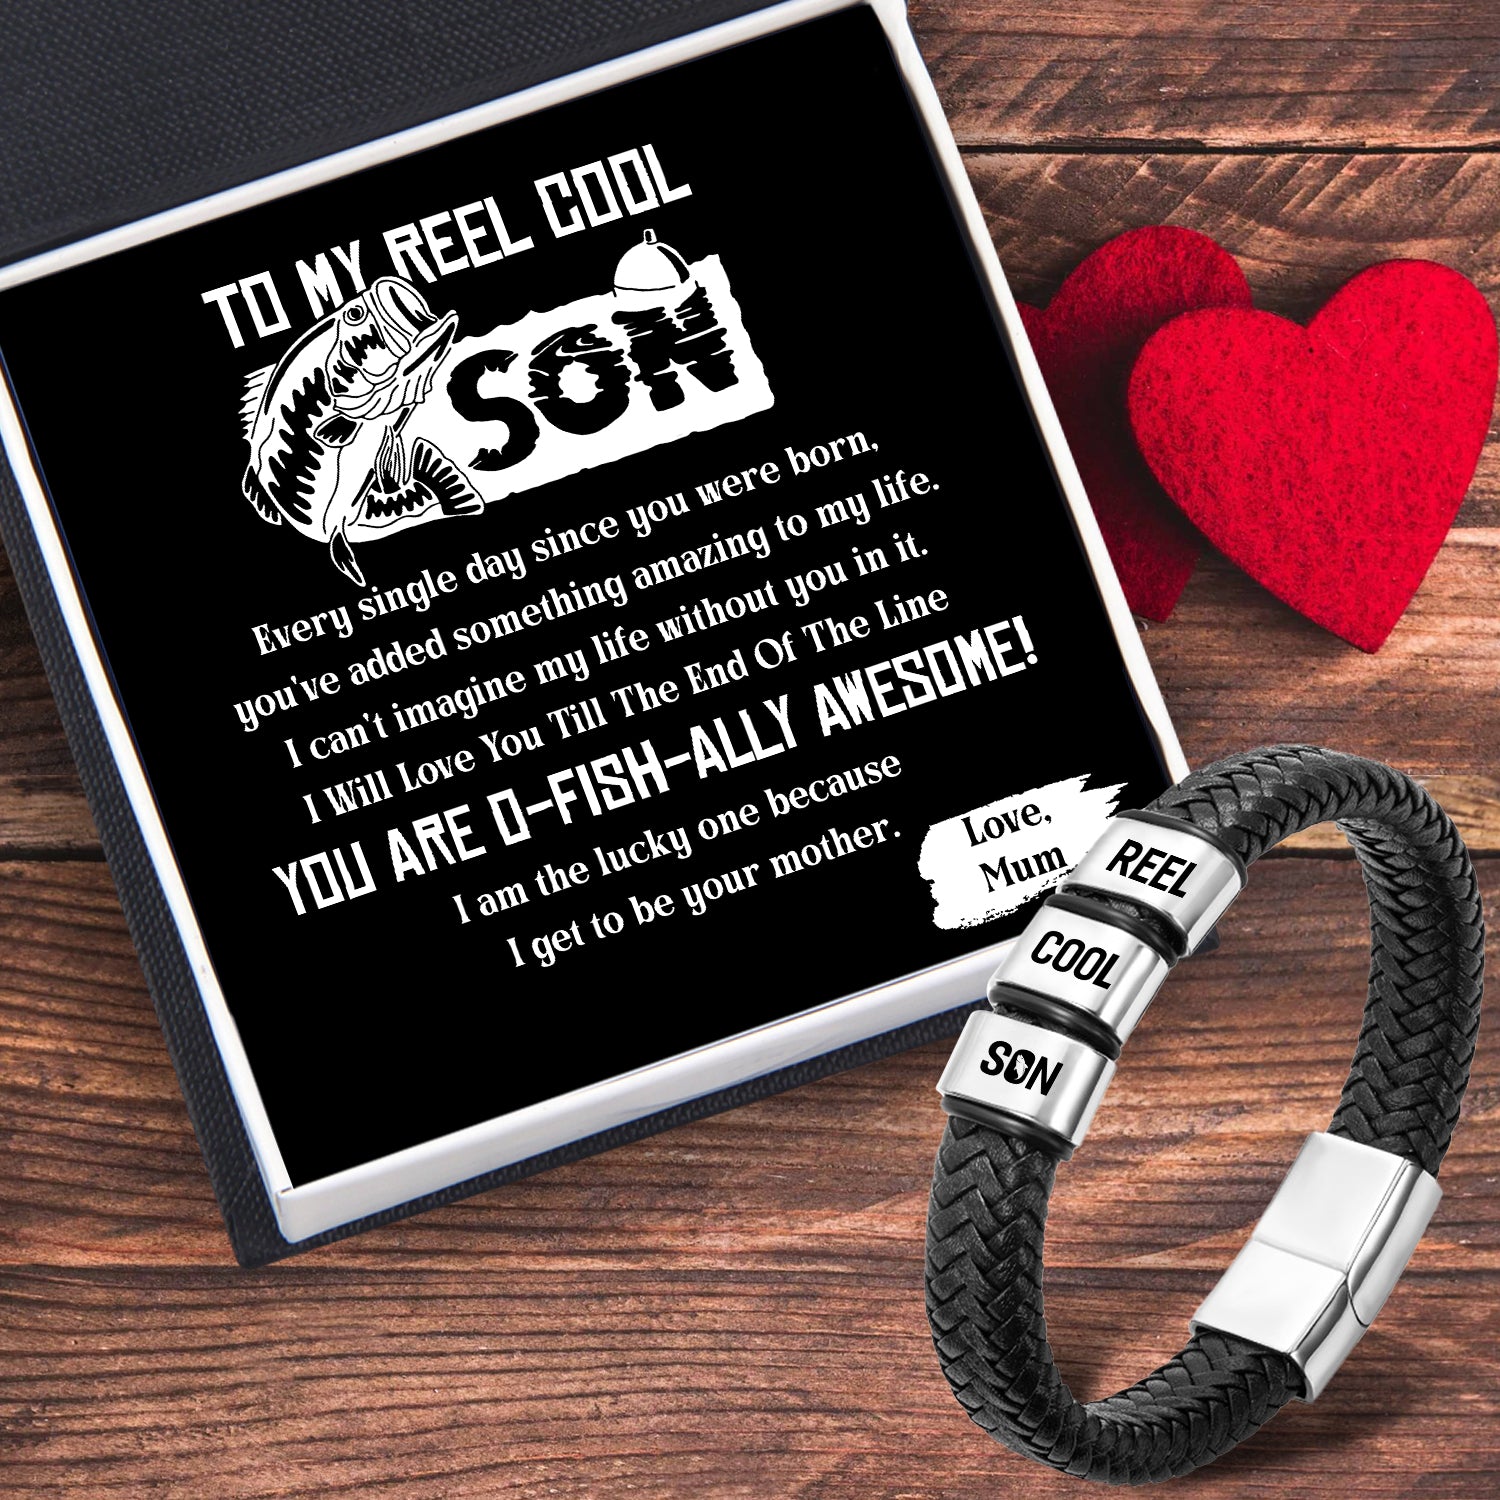 Leather Bracelet - Fishing - To My Son - I Will Love You Till The End Of The Line - Ukgbzl16024